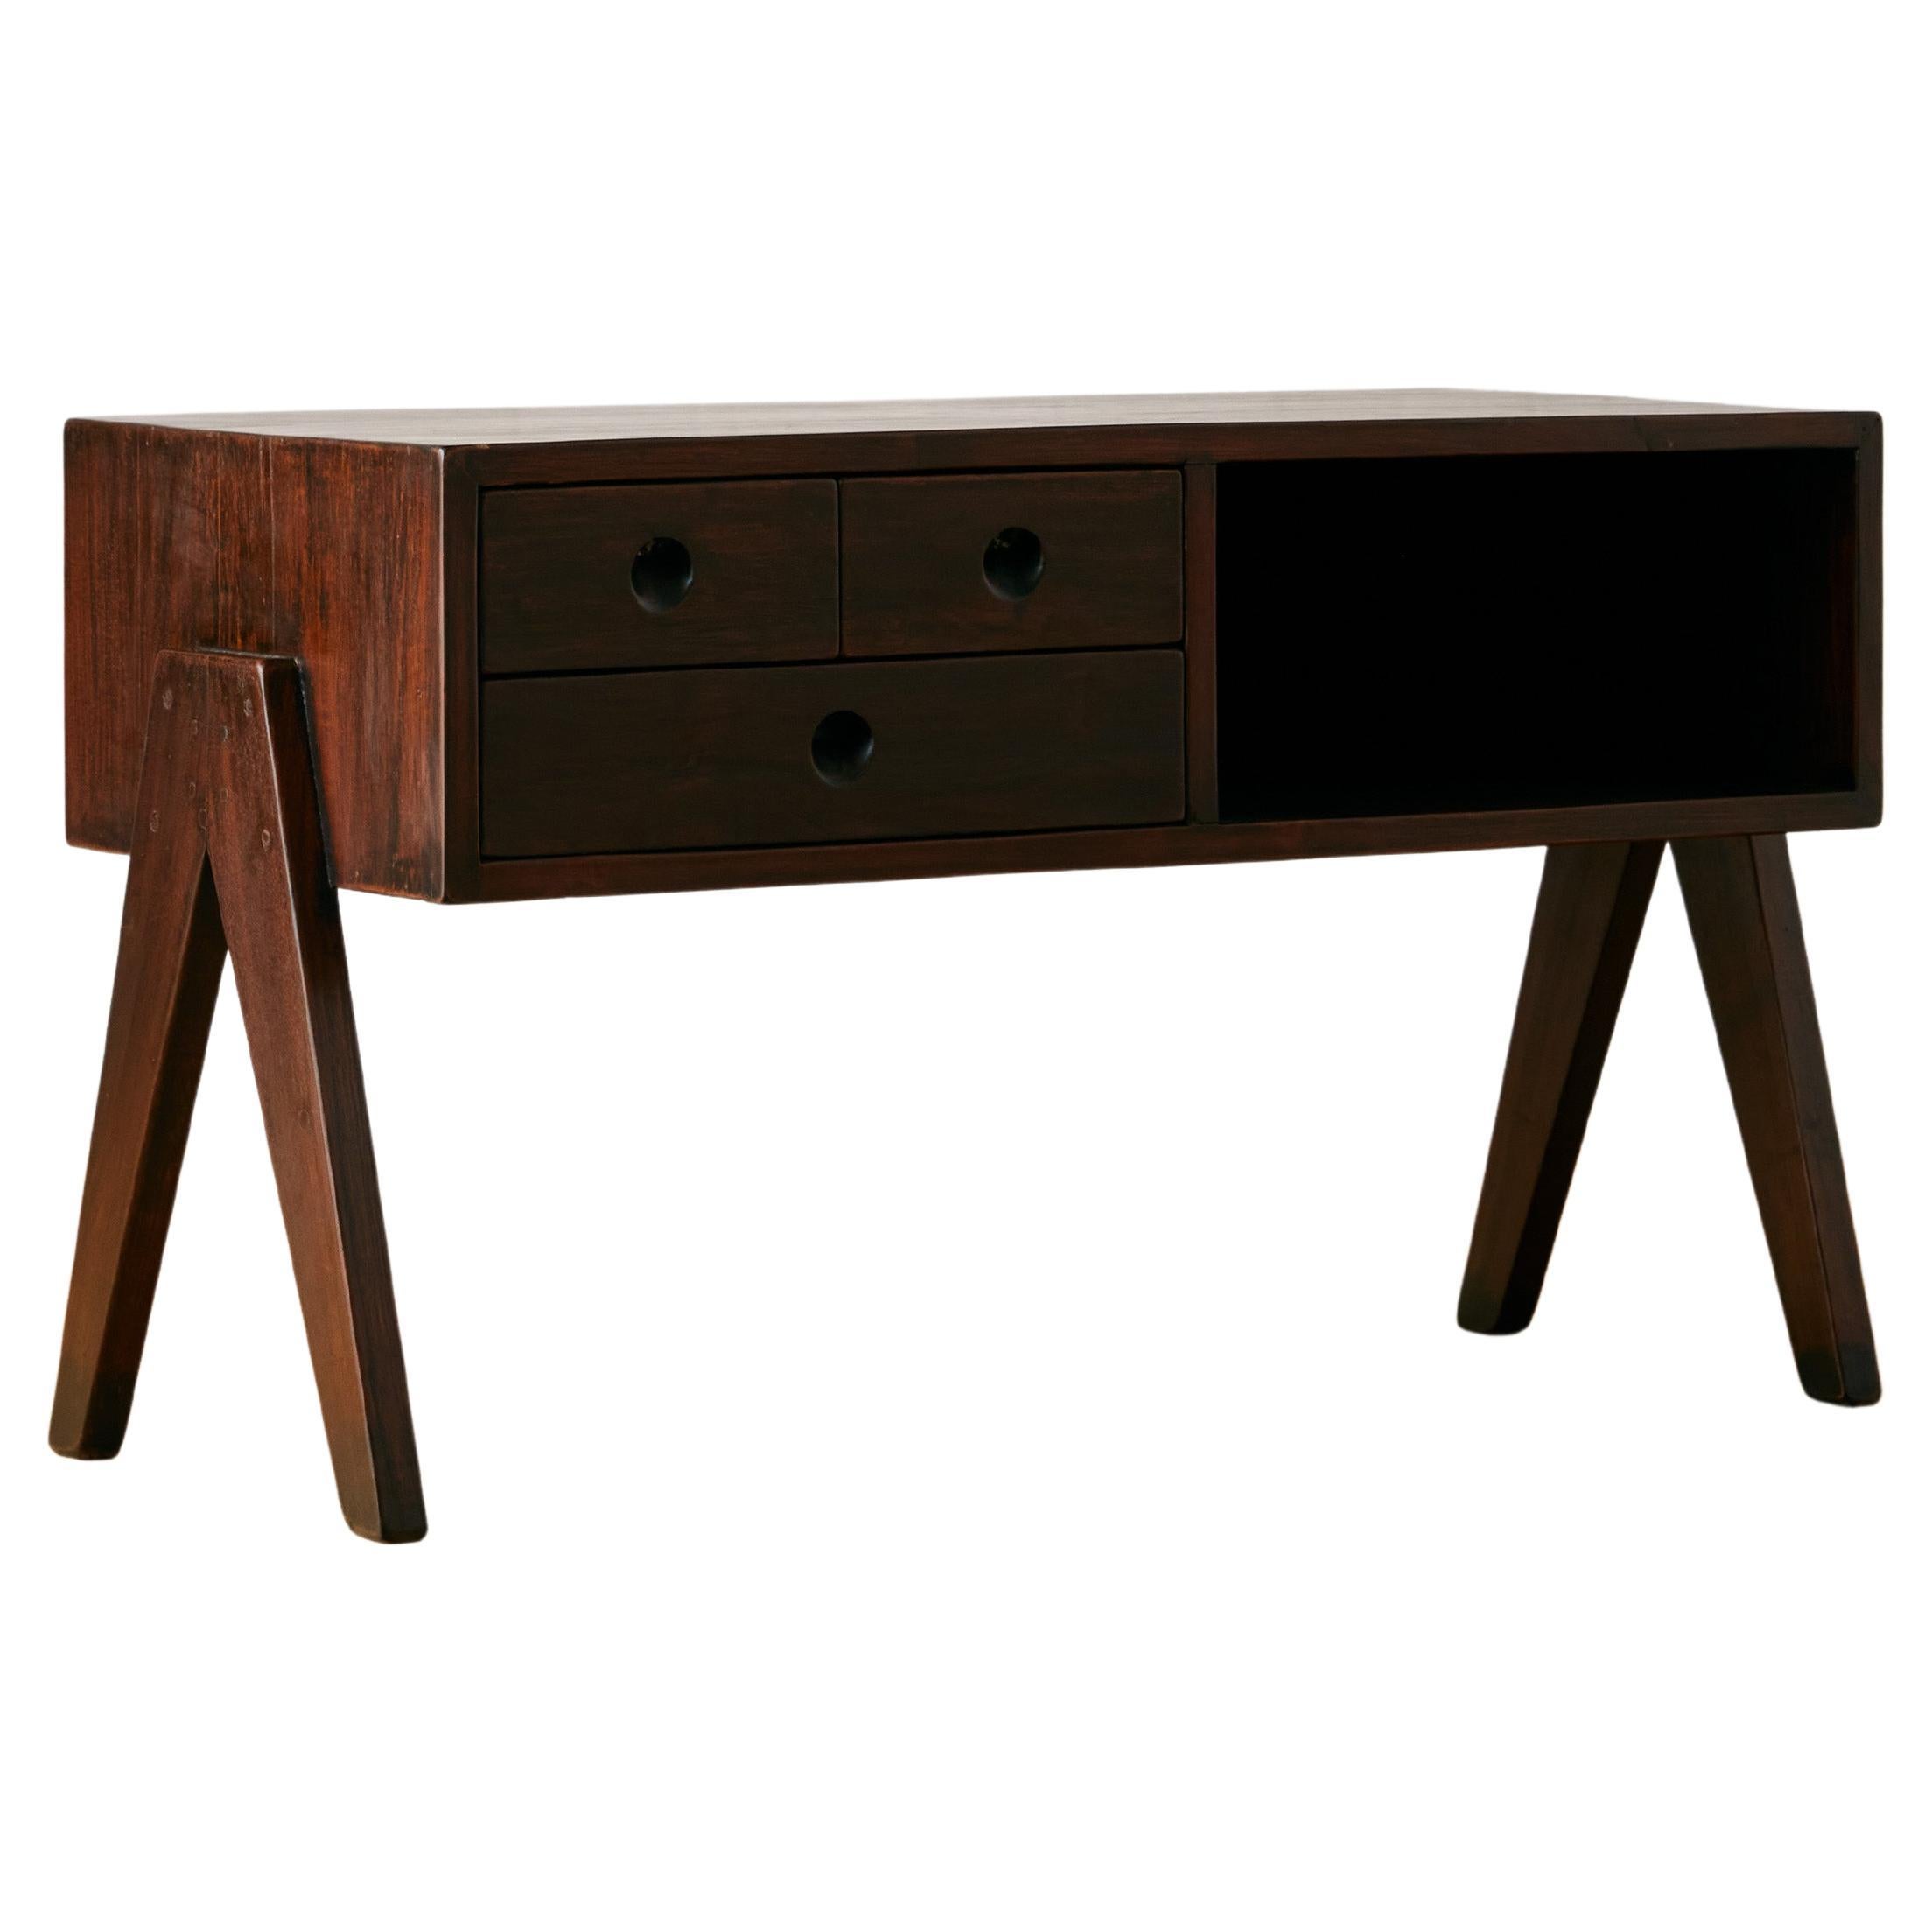 Chest of Drawers by Pierre Jeanneret (MODEL PJ-R-11-A)